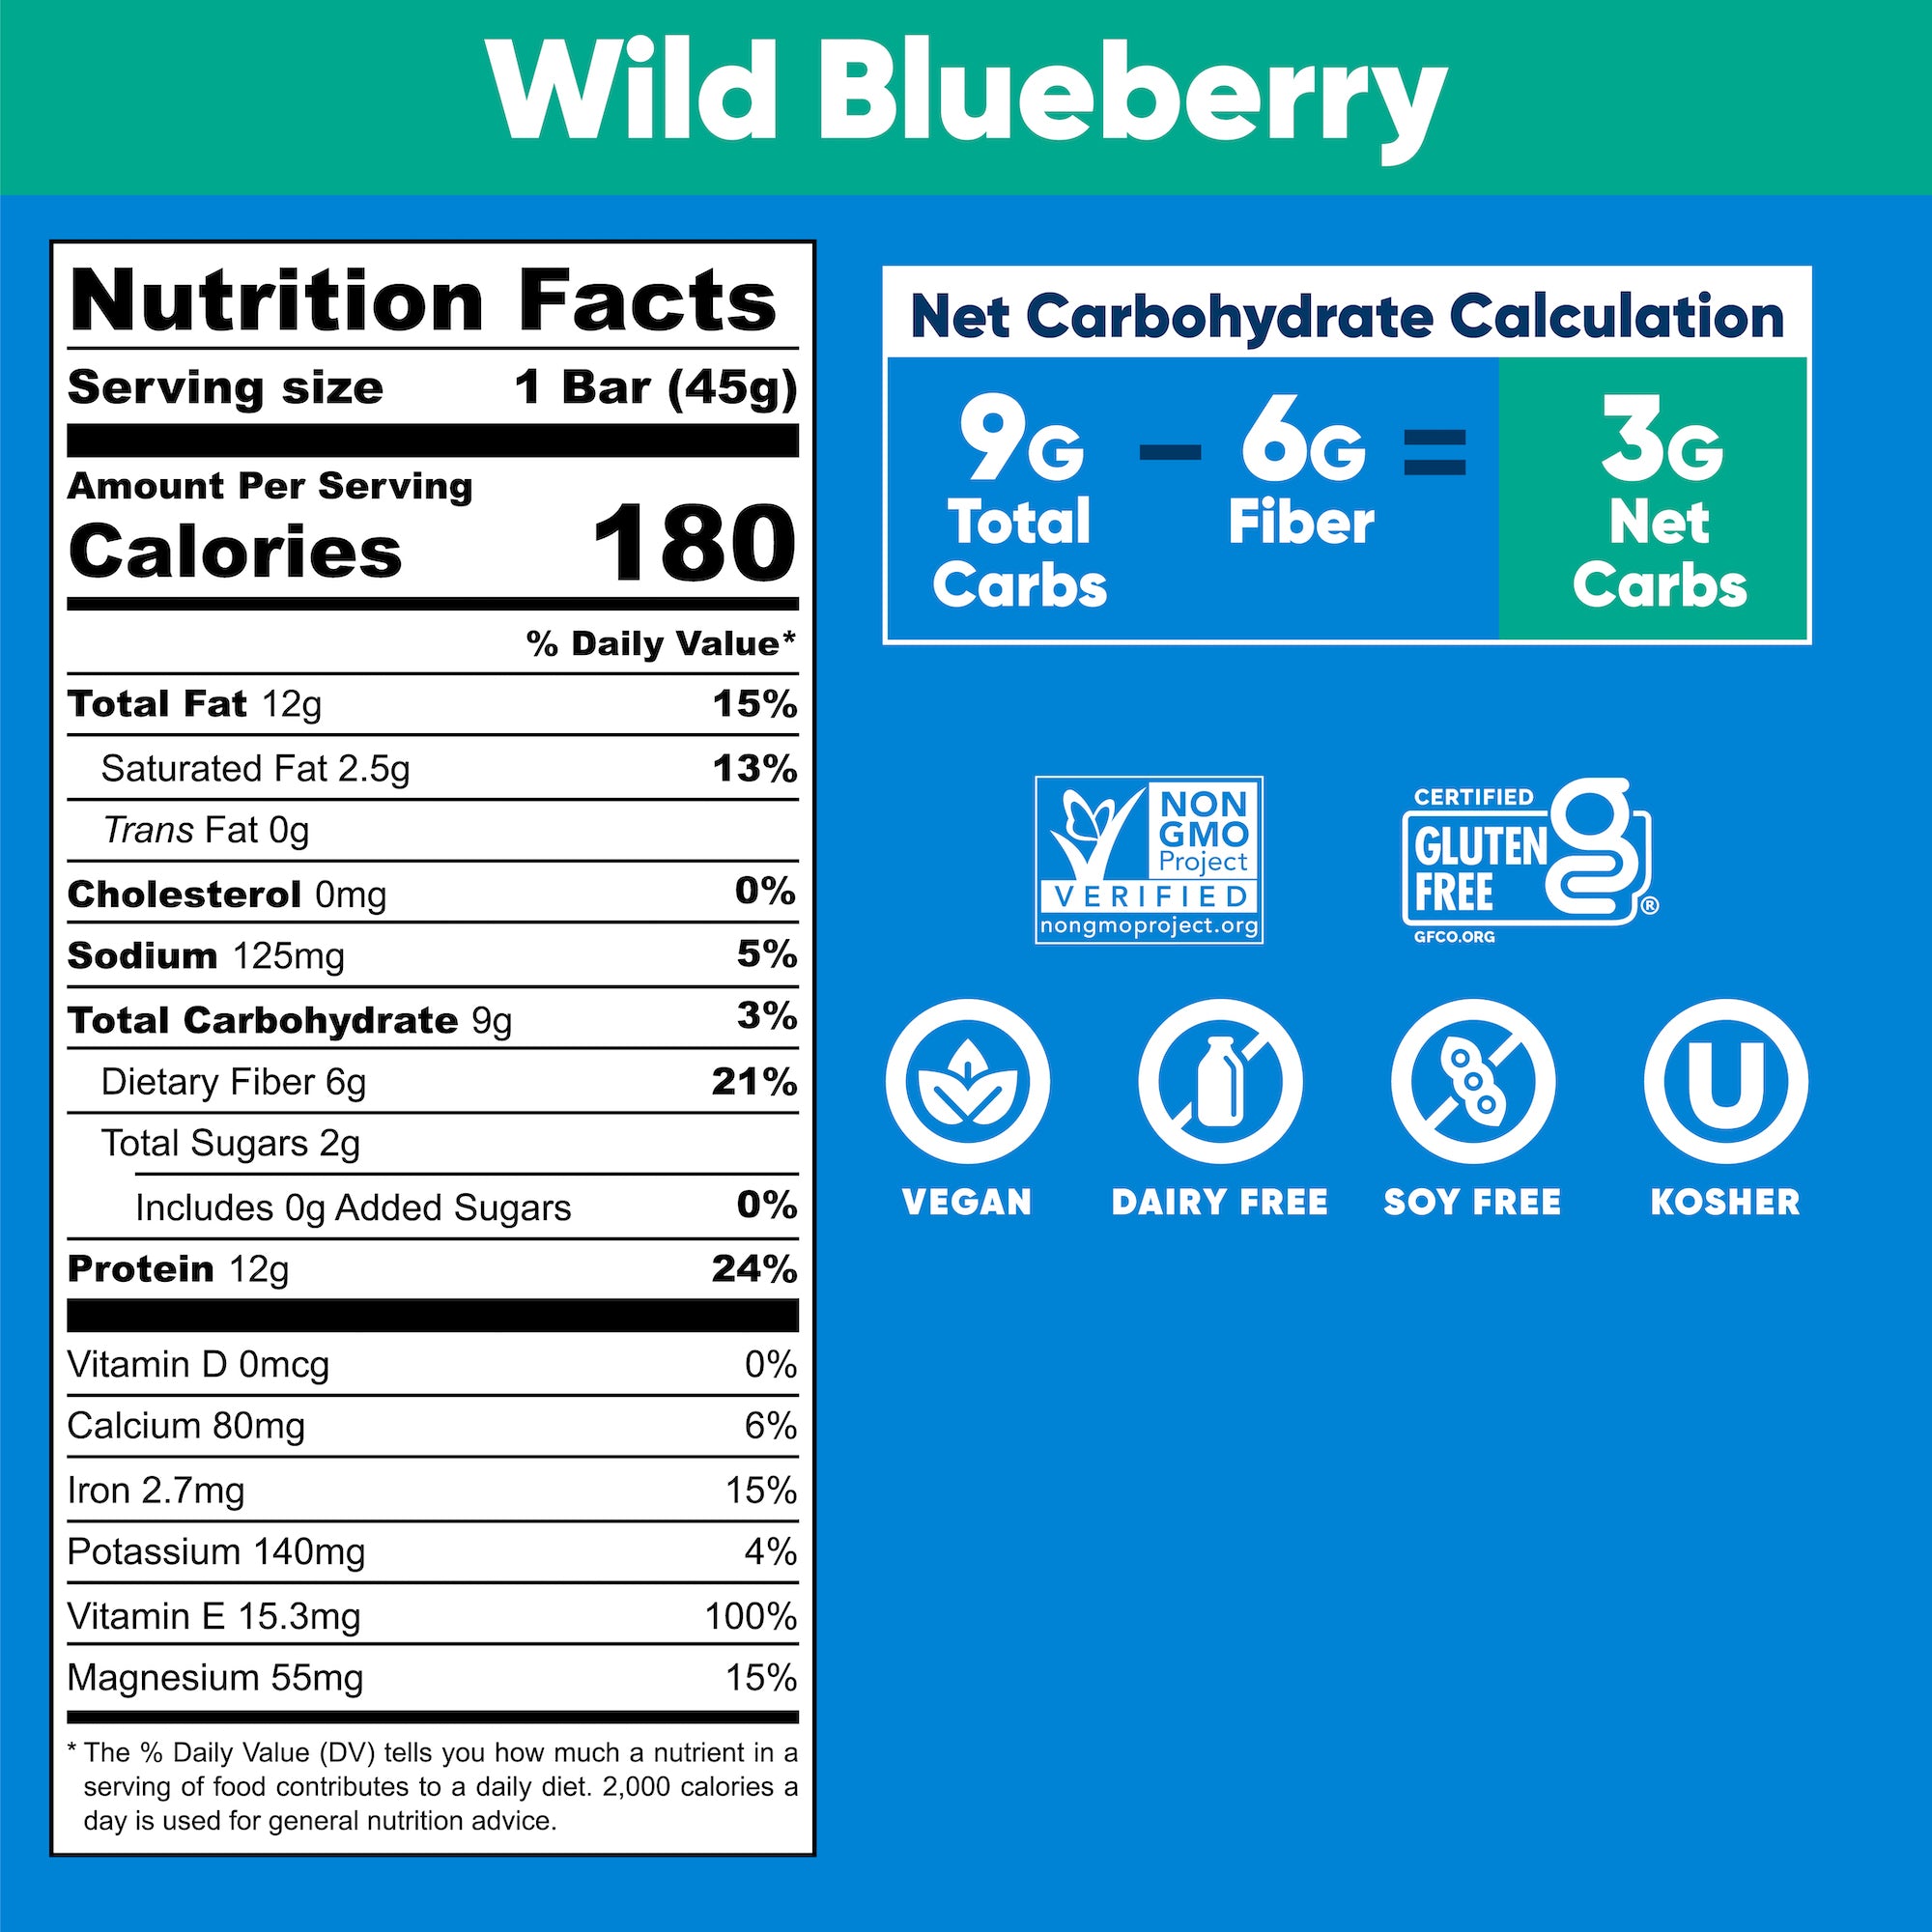 Lemon Blueberry Nutrition Facts. Serving Size: 1 (45 grams). Amount Per Serving. Calories: 180. % Daily Value. Total Fat: 15 grams, 19%. Saturated Fat: 2 grams, 10%. Trans Fat: 0 grams. Cholesterol: 0 milligrams, 0%. Sodium: 95 milligrams, 4%. Total Carbohydrate: 11 grams, 4%. Dietary Fiber: 8 grams, 29%. Total Sugars: 2 grams. Includes: 0 grams Added Sugars, 0%. Protein: 12 grams, 24%. Vitamin D: 0.1 micrograms, 0%. Calcium: 90 milligrams, 6%. Iron: 1.6 milligrams, 8%. Potassium: 170 milligrams, 4%. Vitamin E: 12.9 milligrams, 90%.